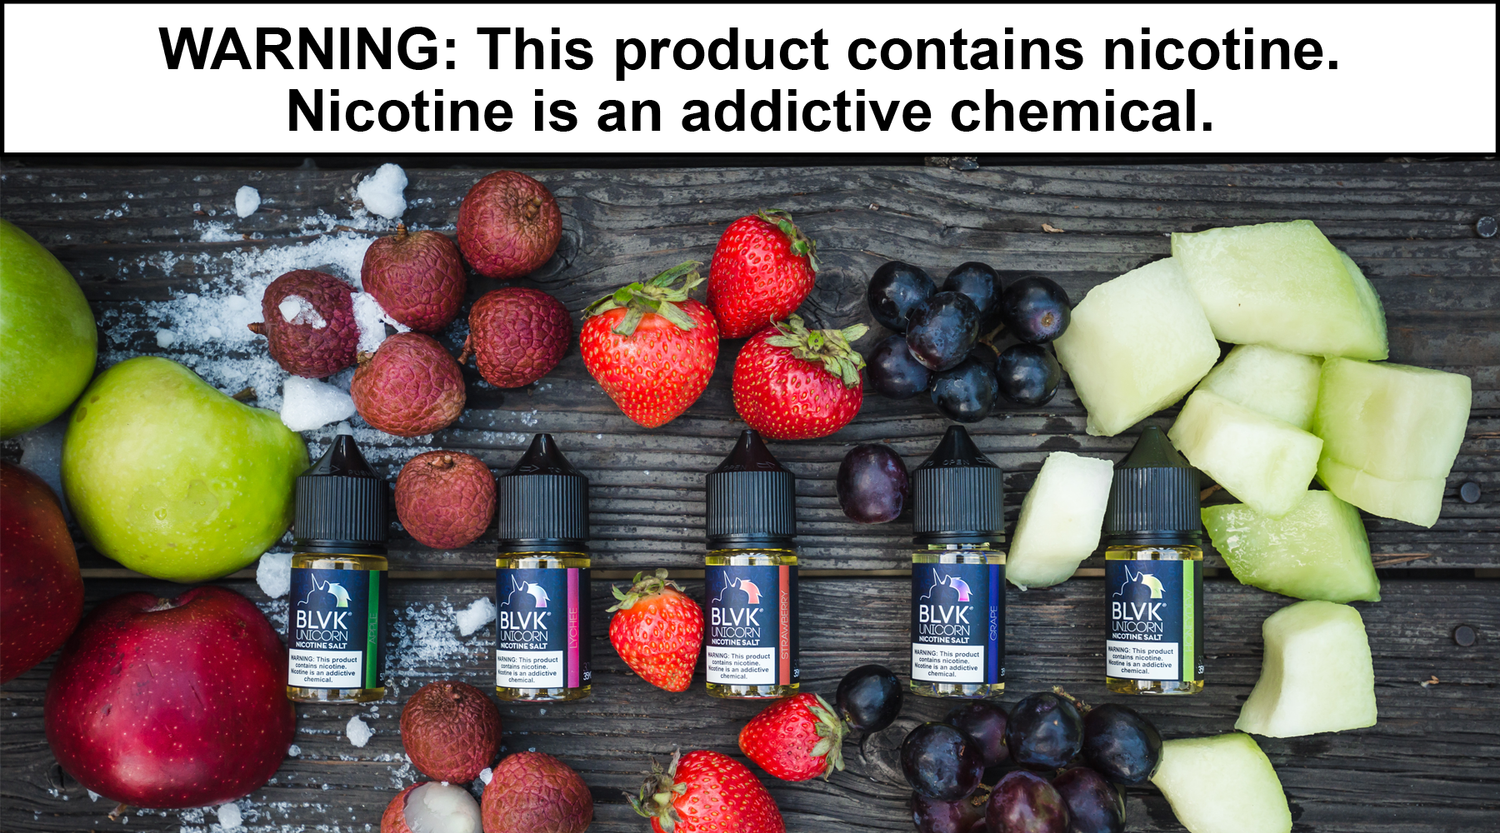 Why is Nicotine Considered a Bad Chemical?